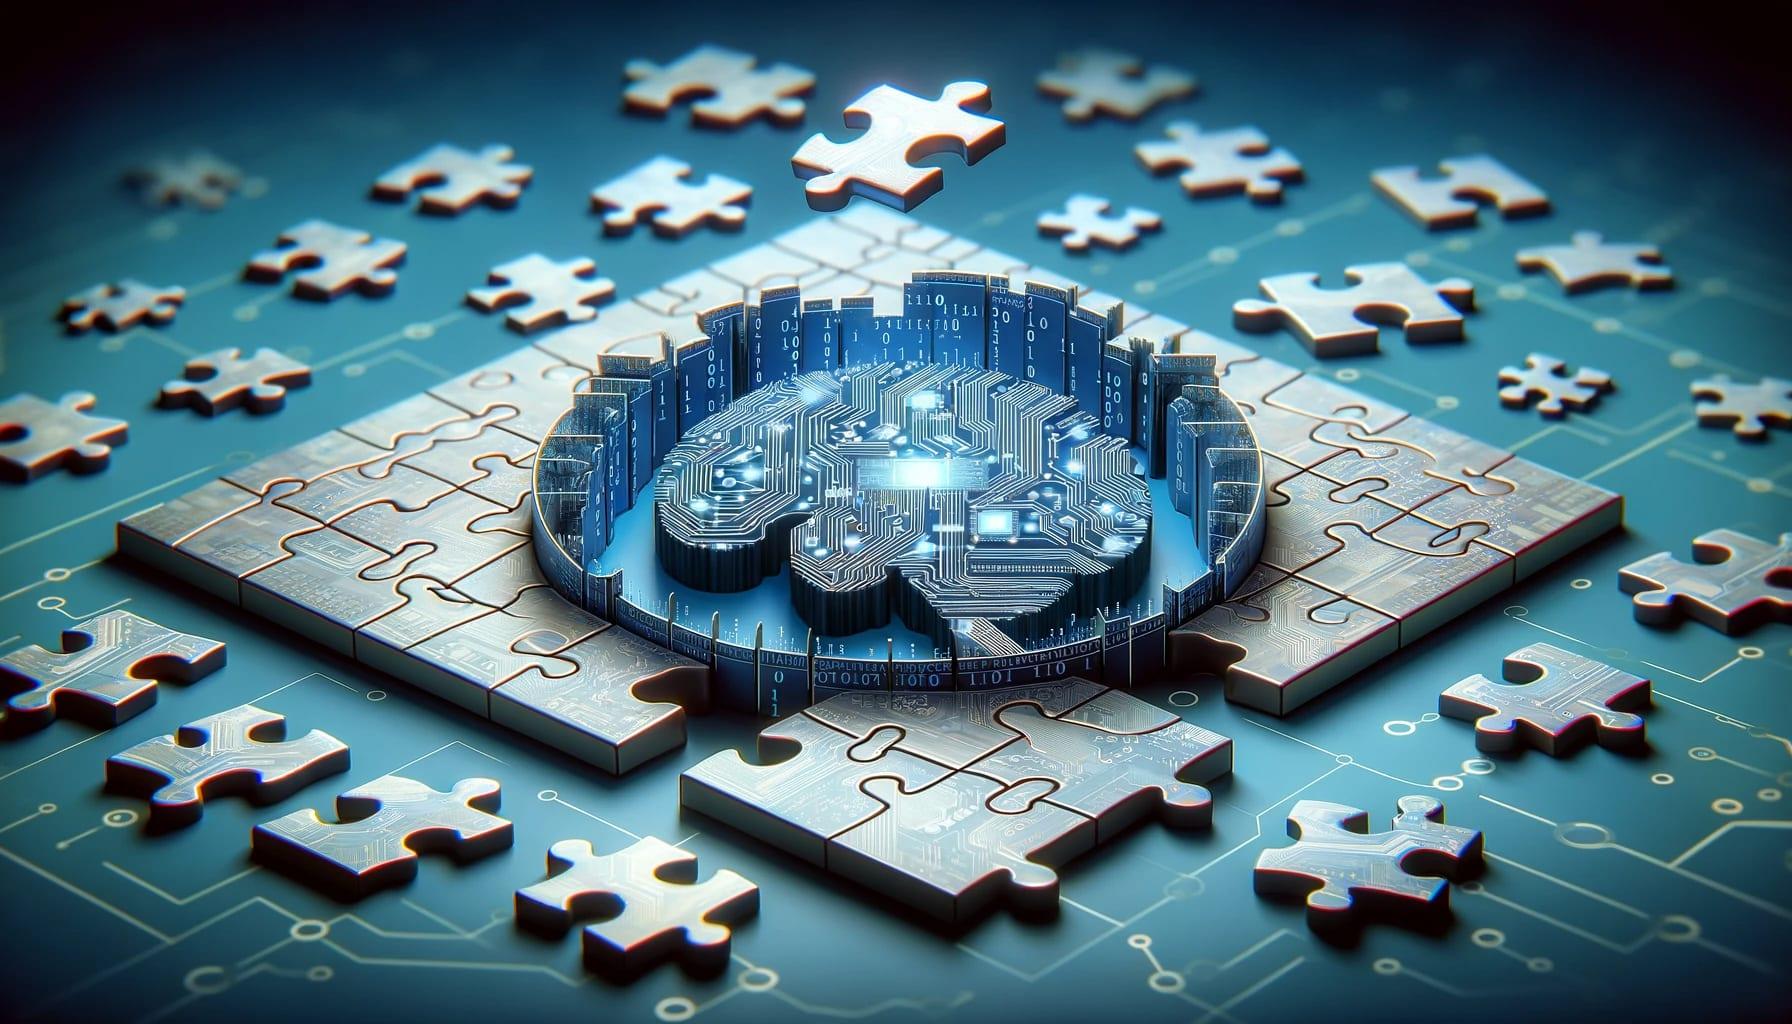 visually represents the integration of AI logic with human reasoning, symbolized through the assembly of a jigsaw puzzle that reveals a digital brain.